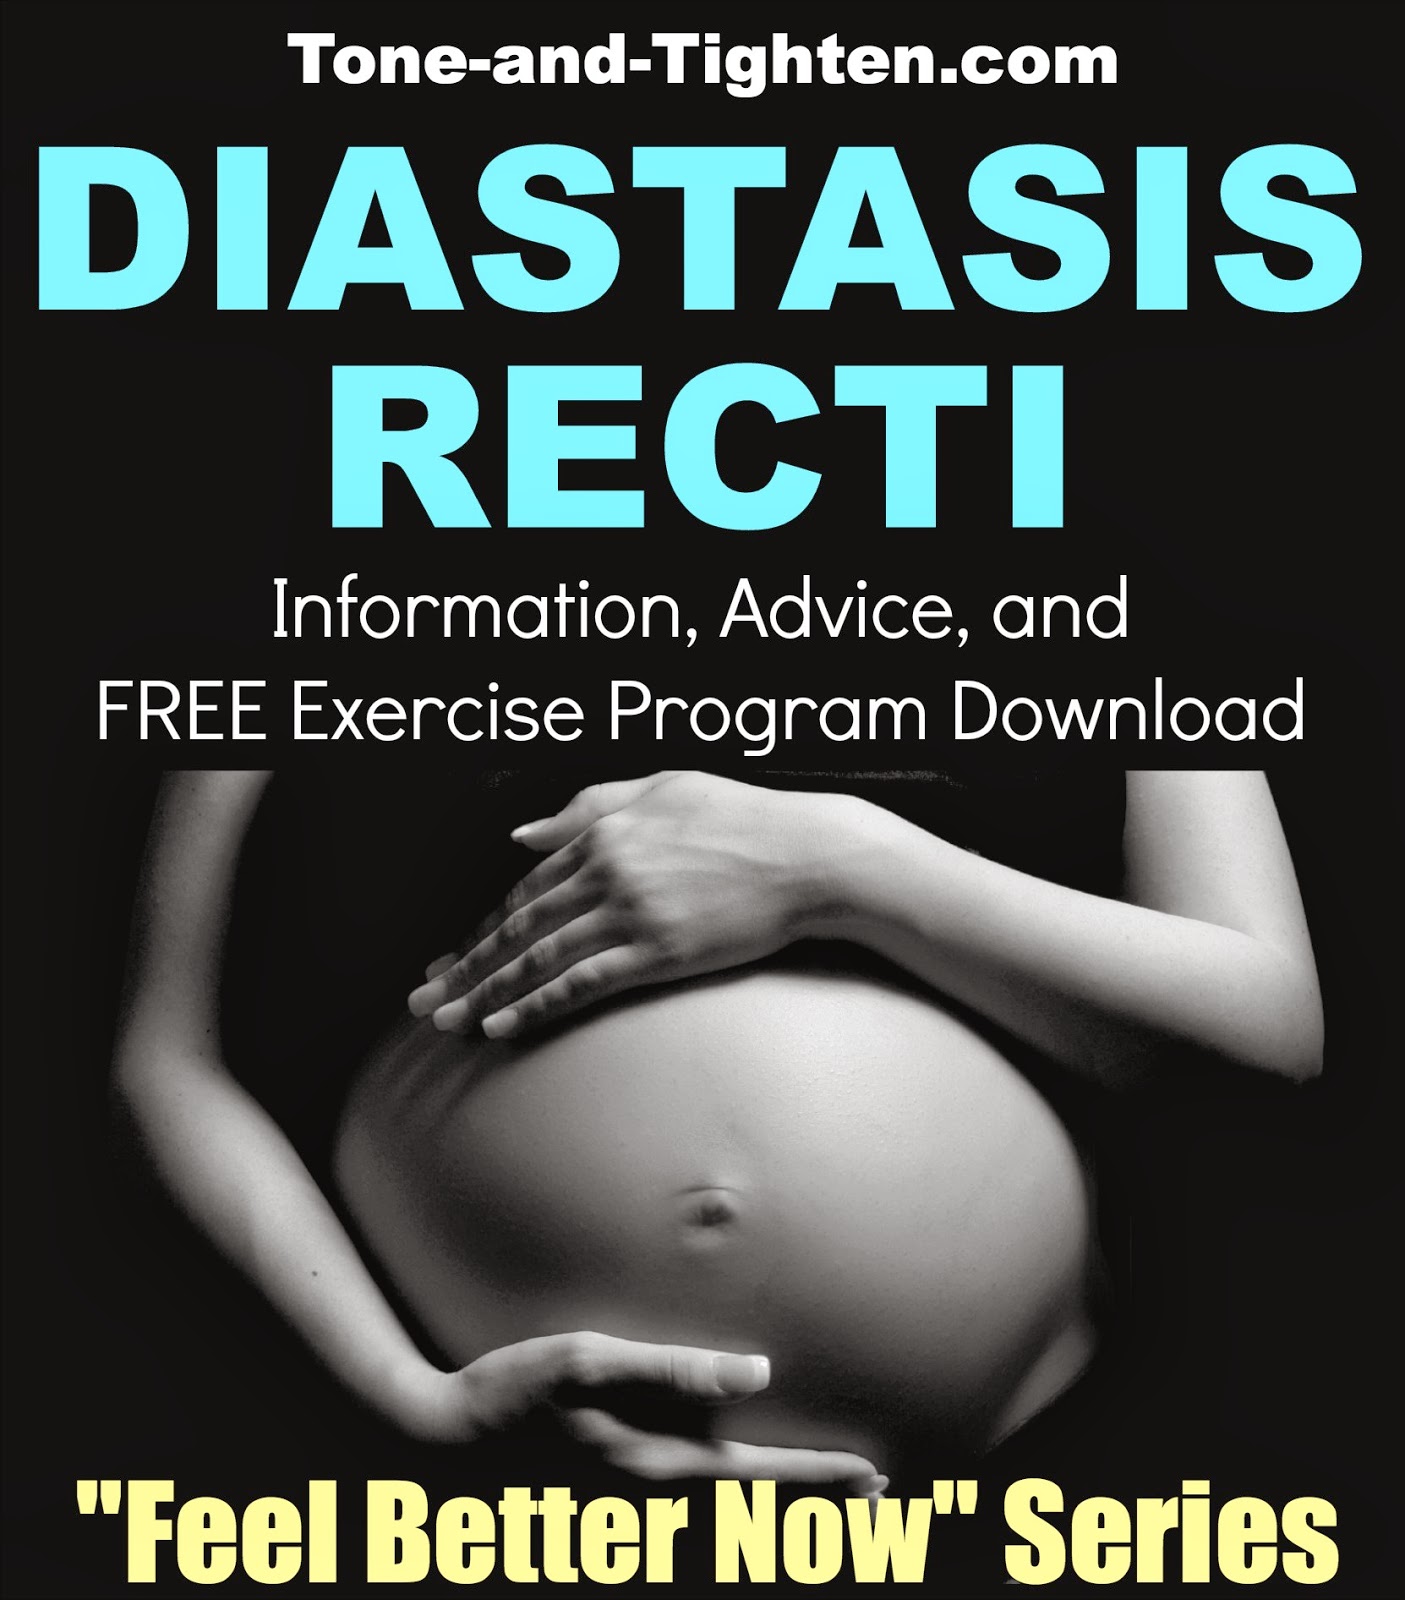 How to treat diastasis recti – advice and exercises to help you “Feel Better Now”